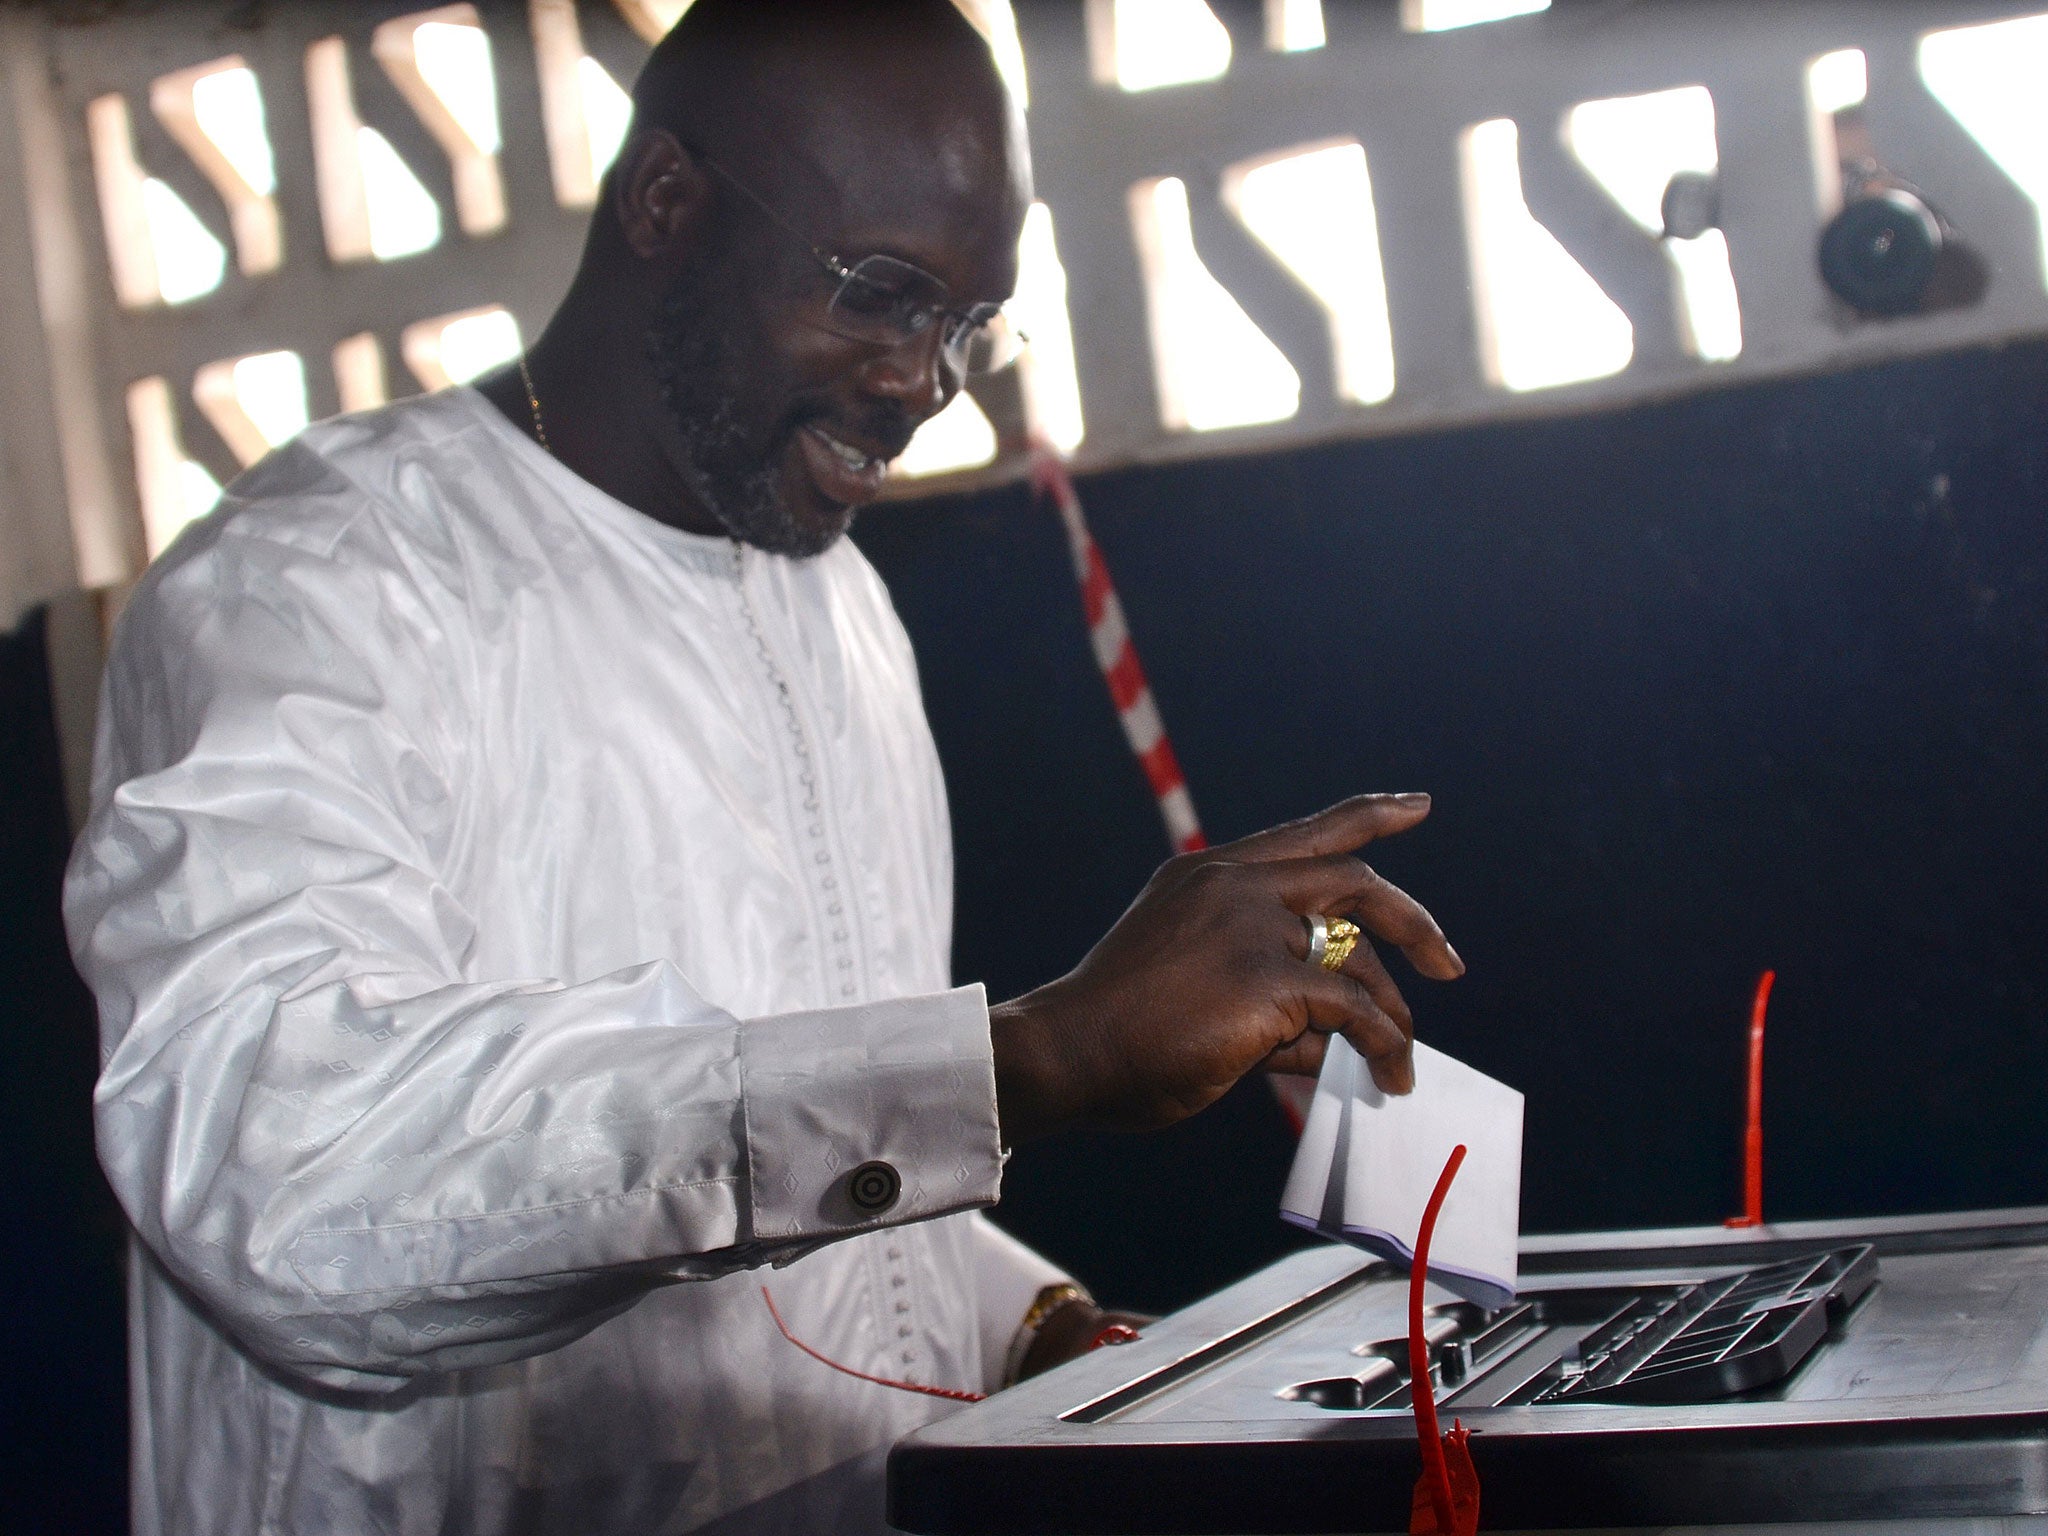 George Weah convincingly beat the President’s son with 78 per cent of the vote